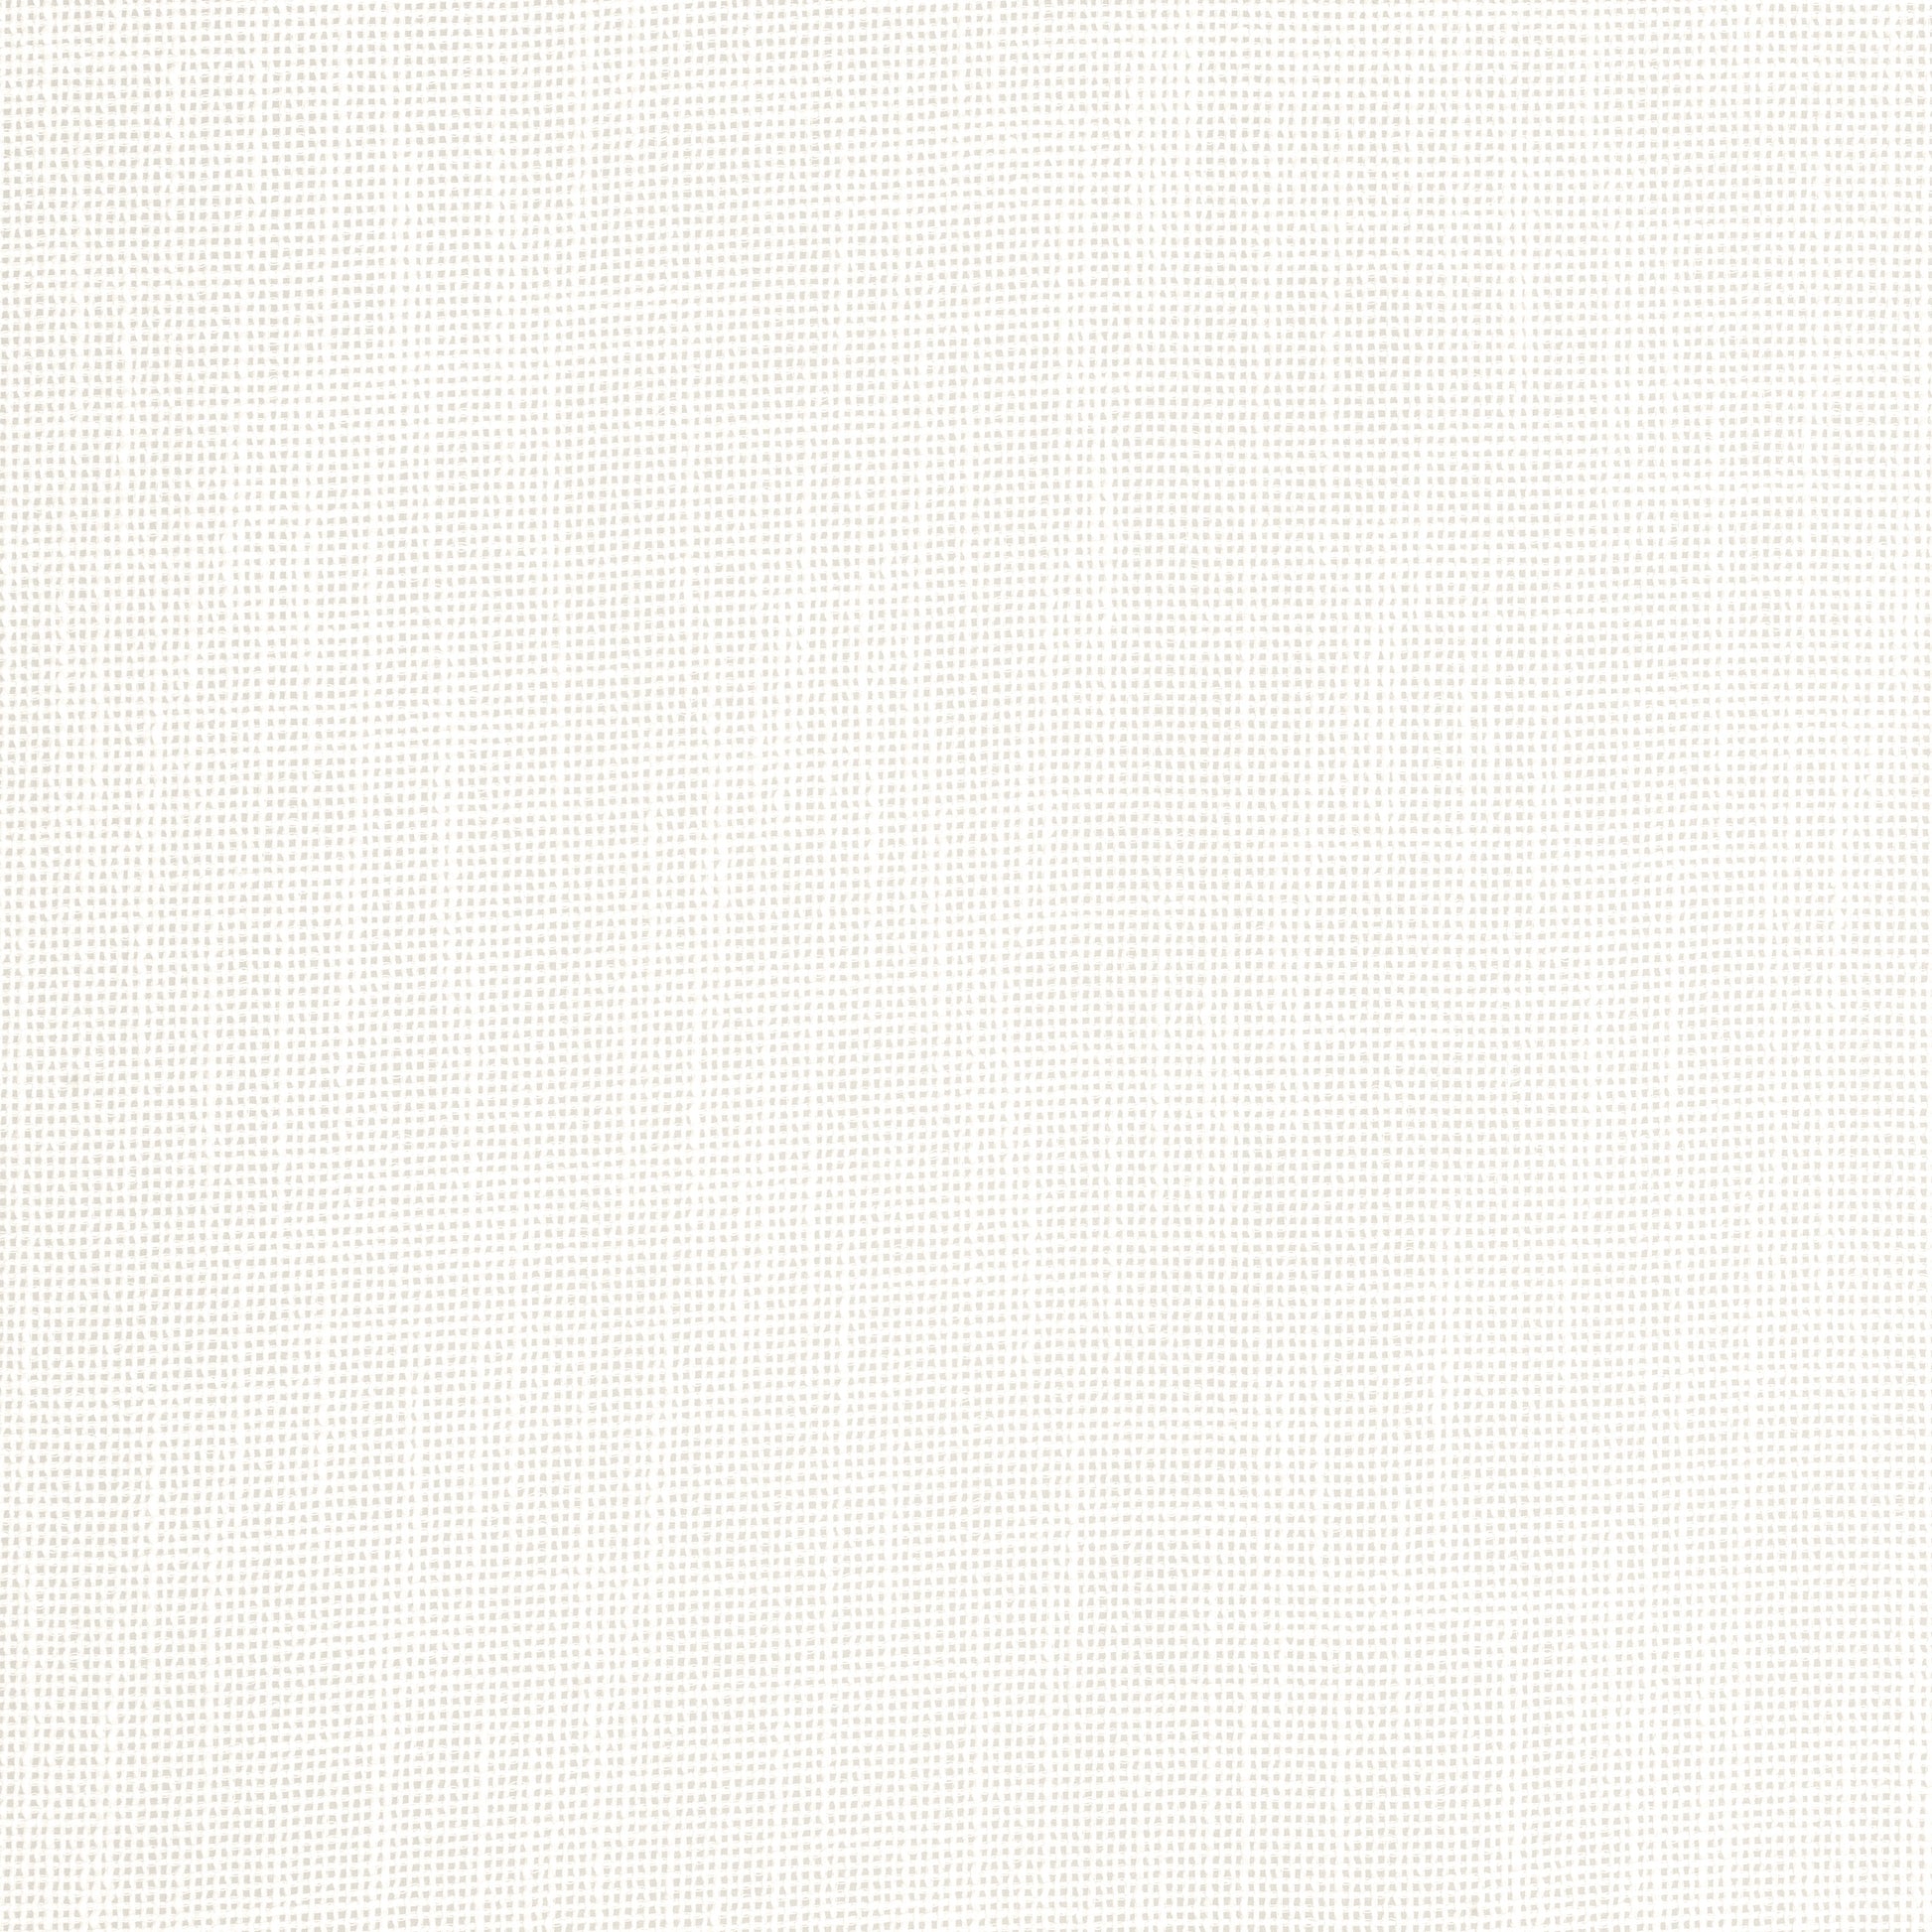 Purchase Thibaut Fabric Product FWW8226 pattern name Mistral color Ivory